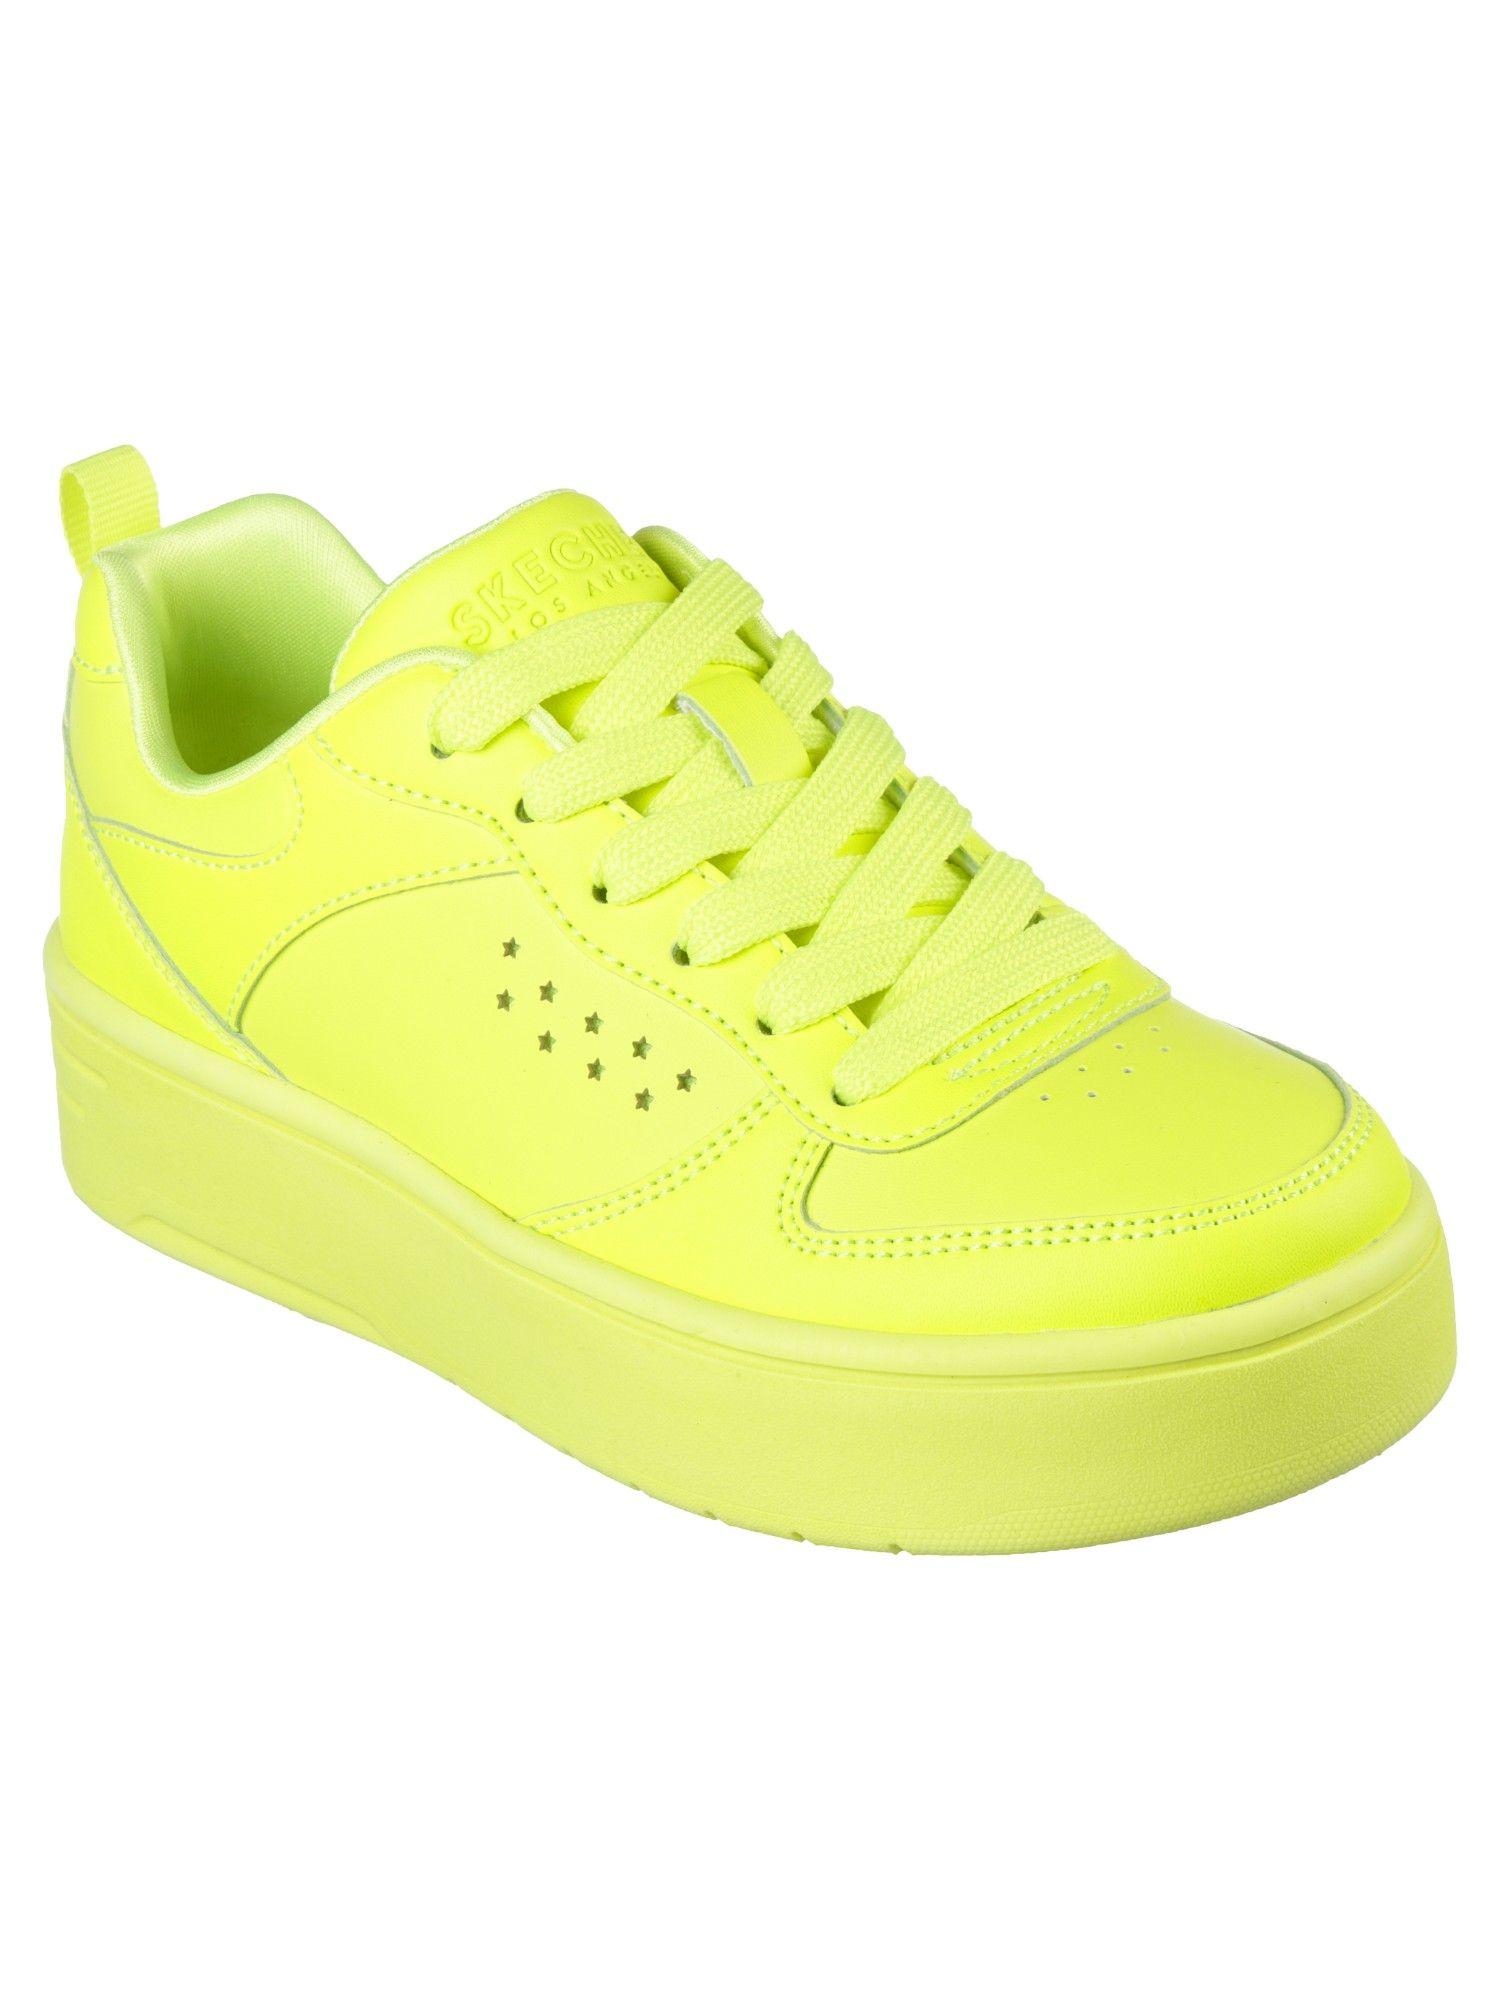 girls-court-high-color-zone-yellow-casual-shoes